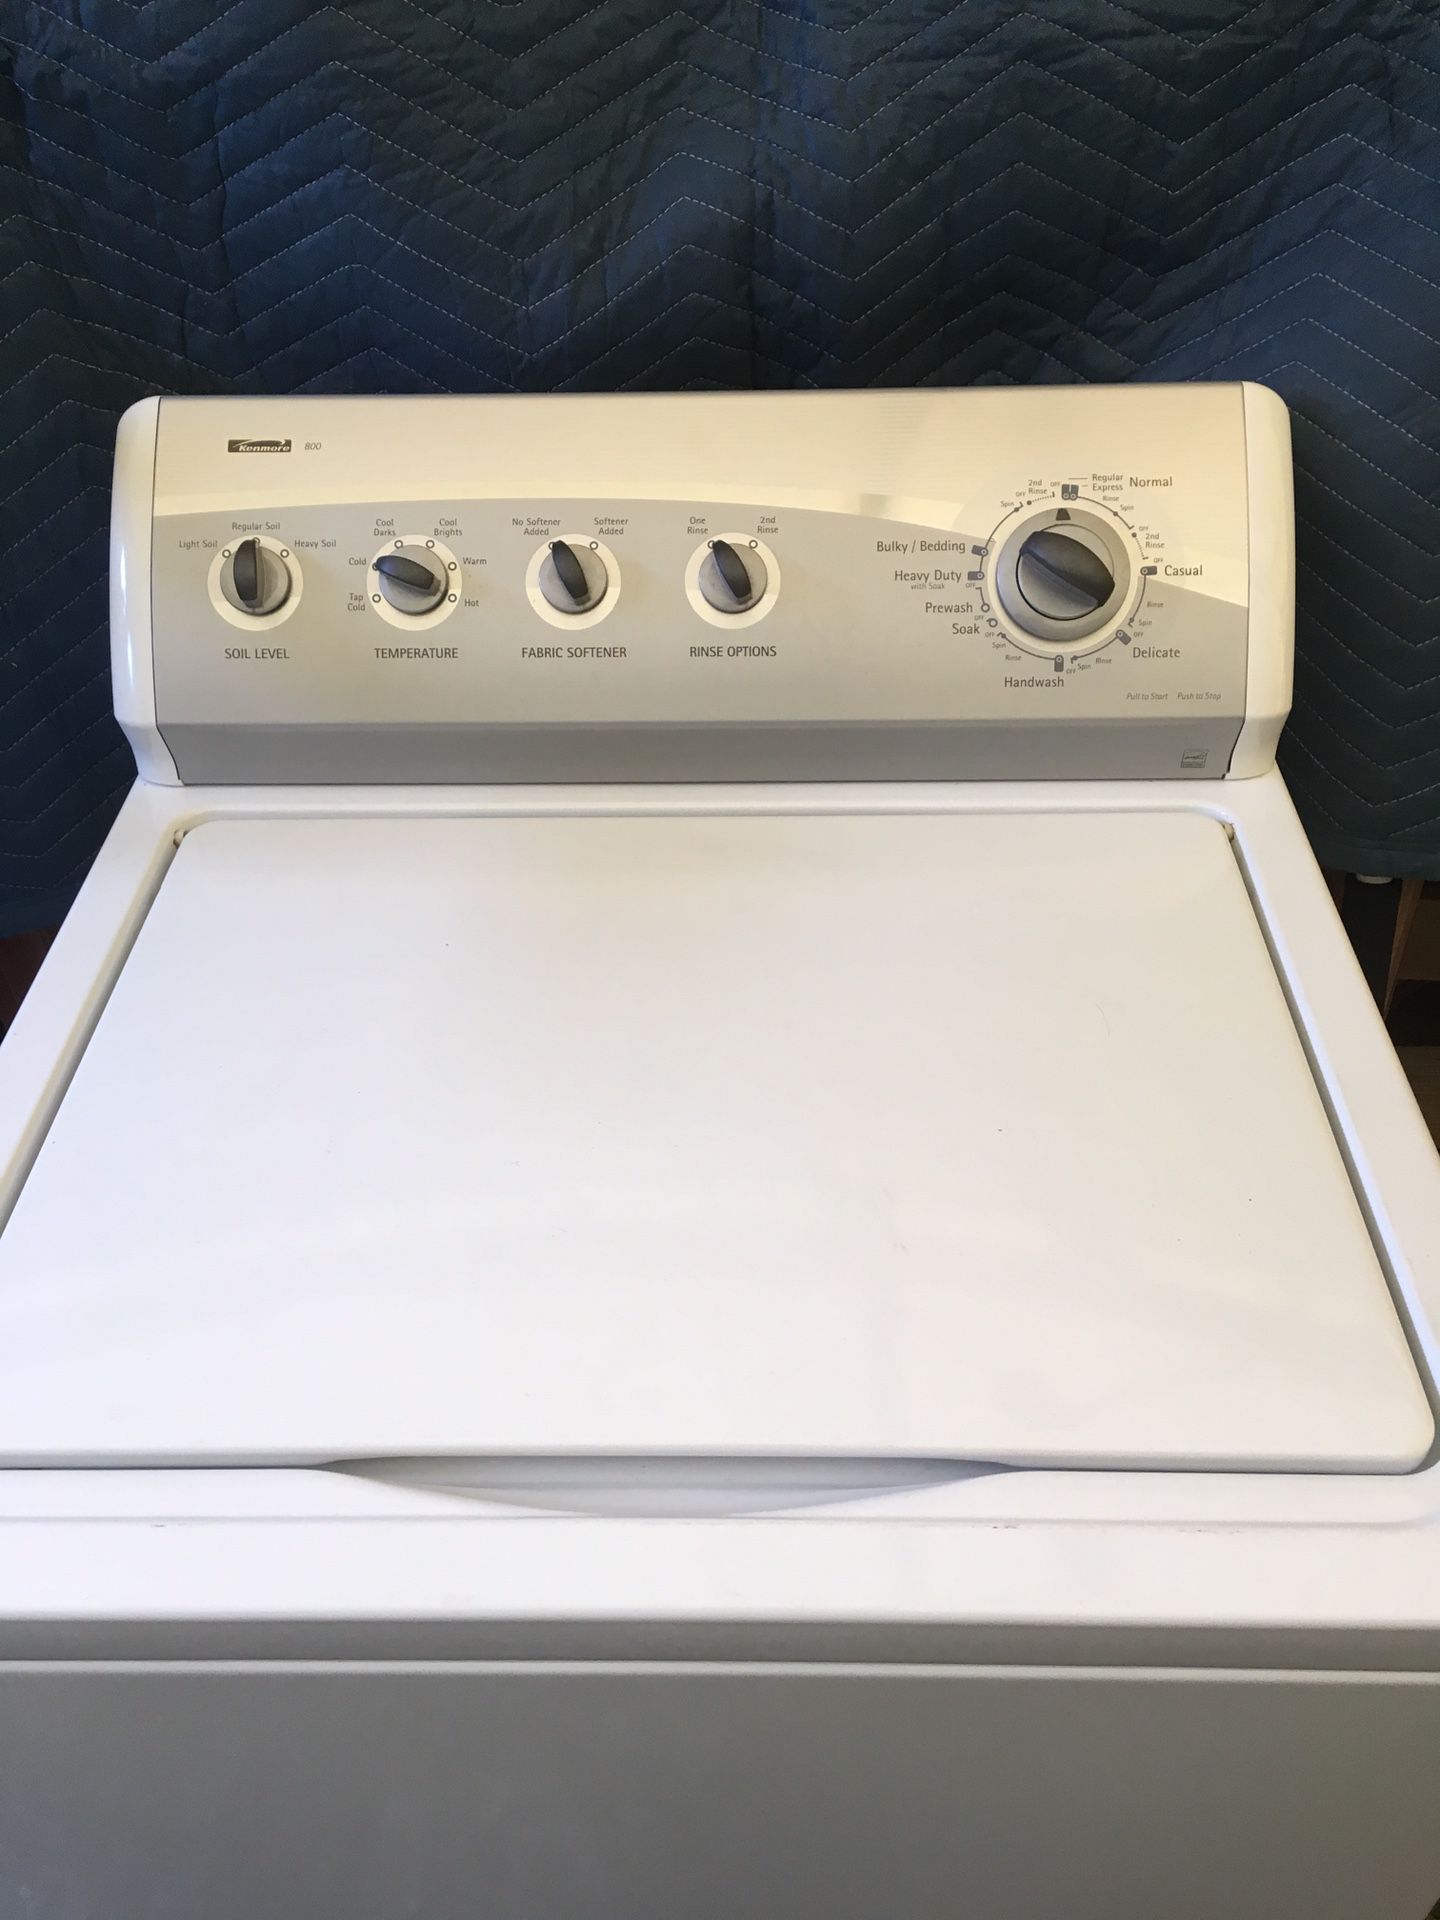 Kenmore Series 800 Top Load Washer